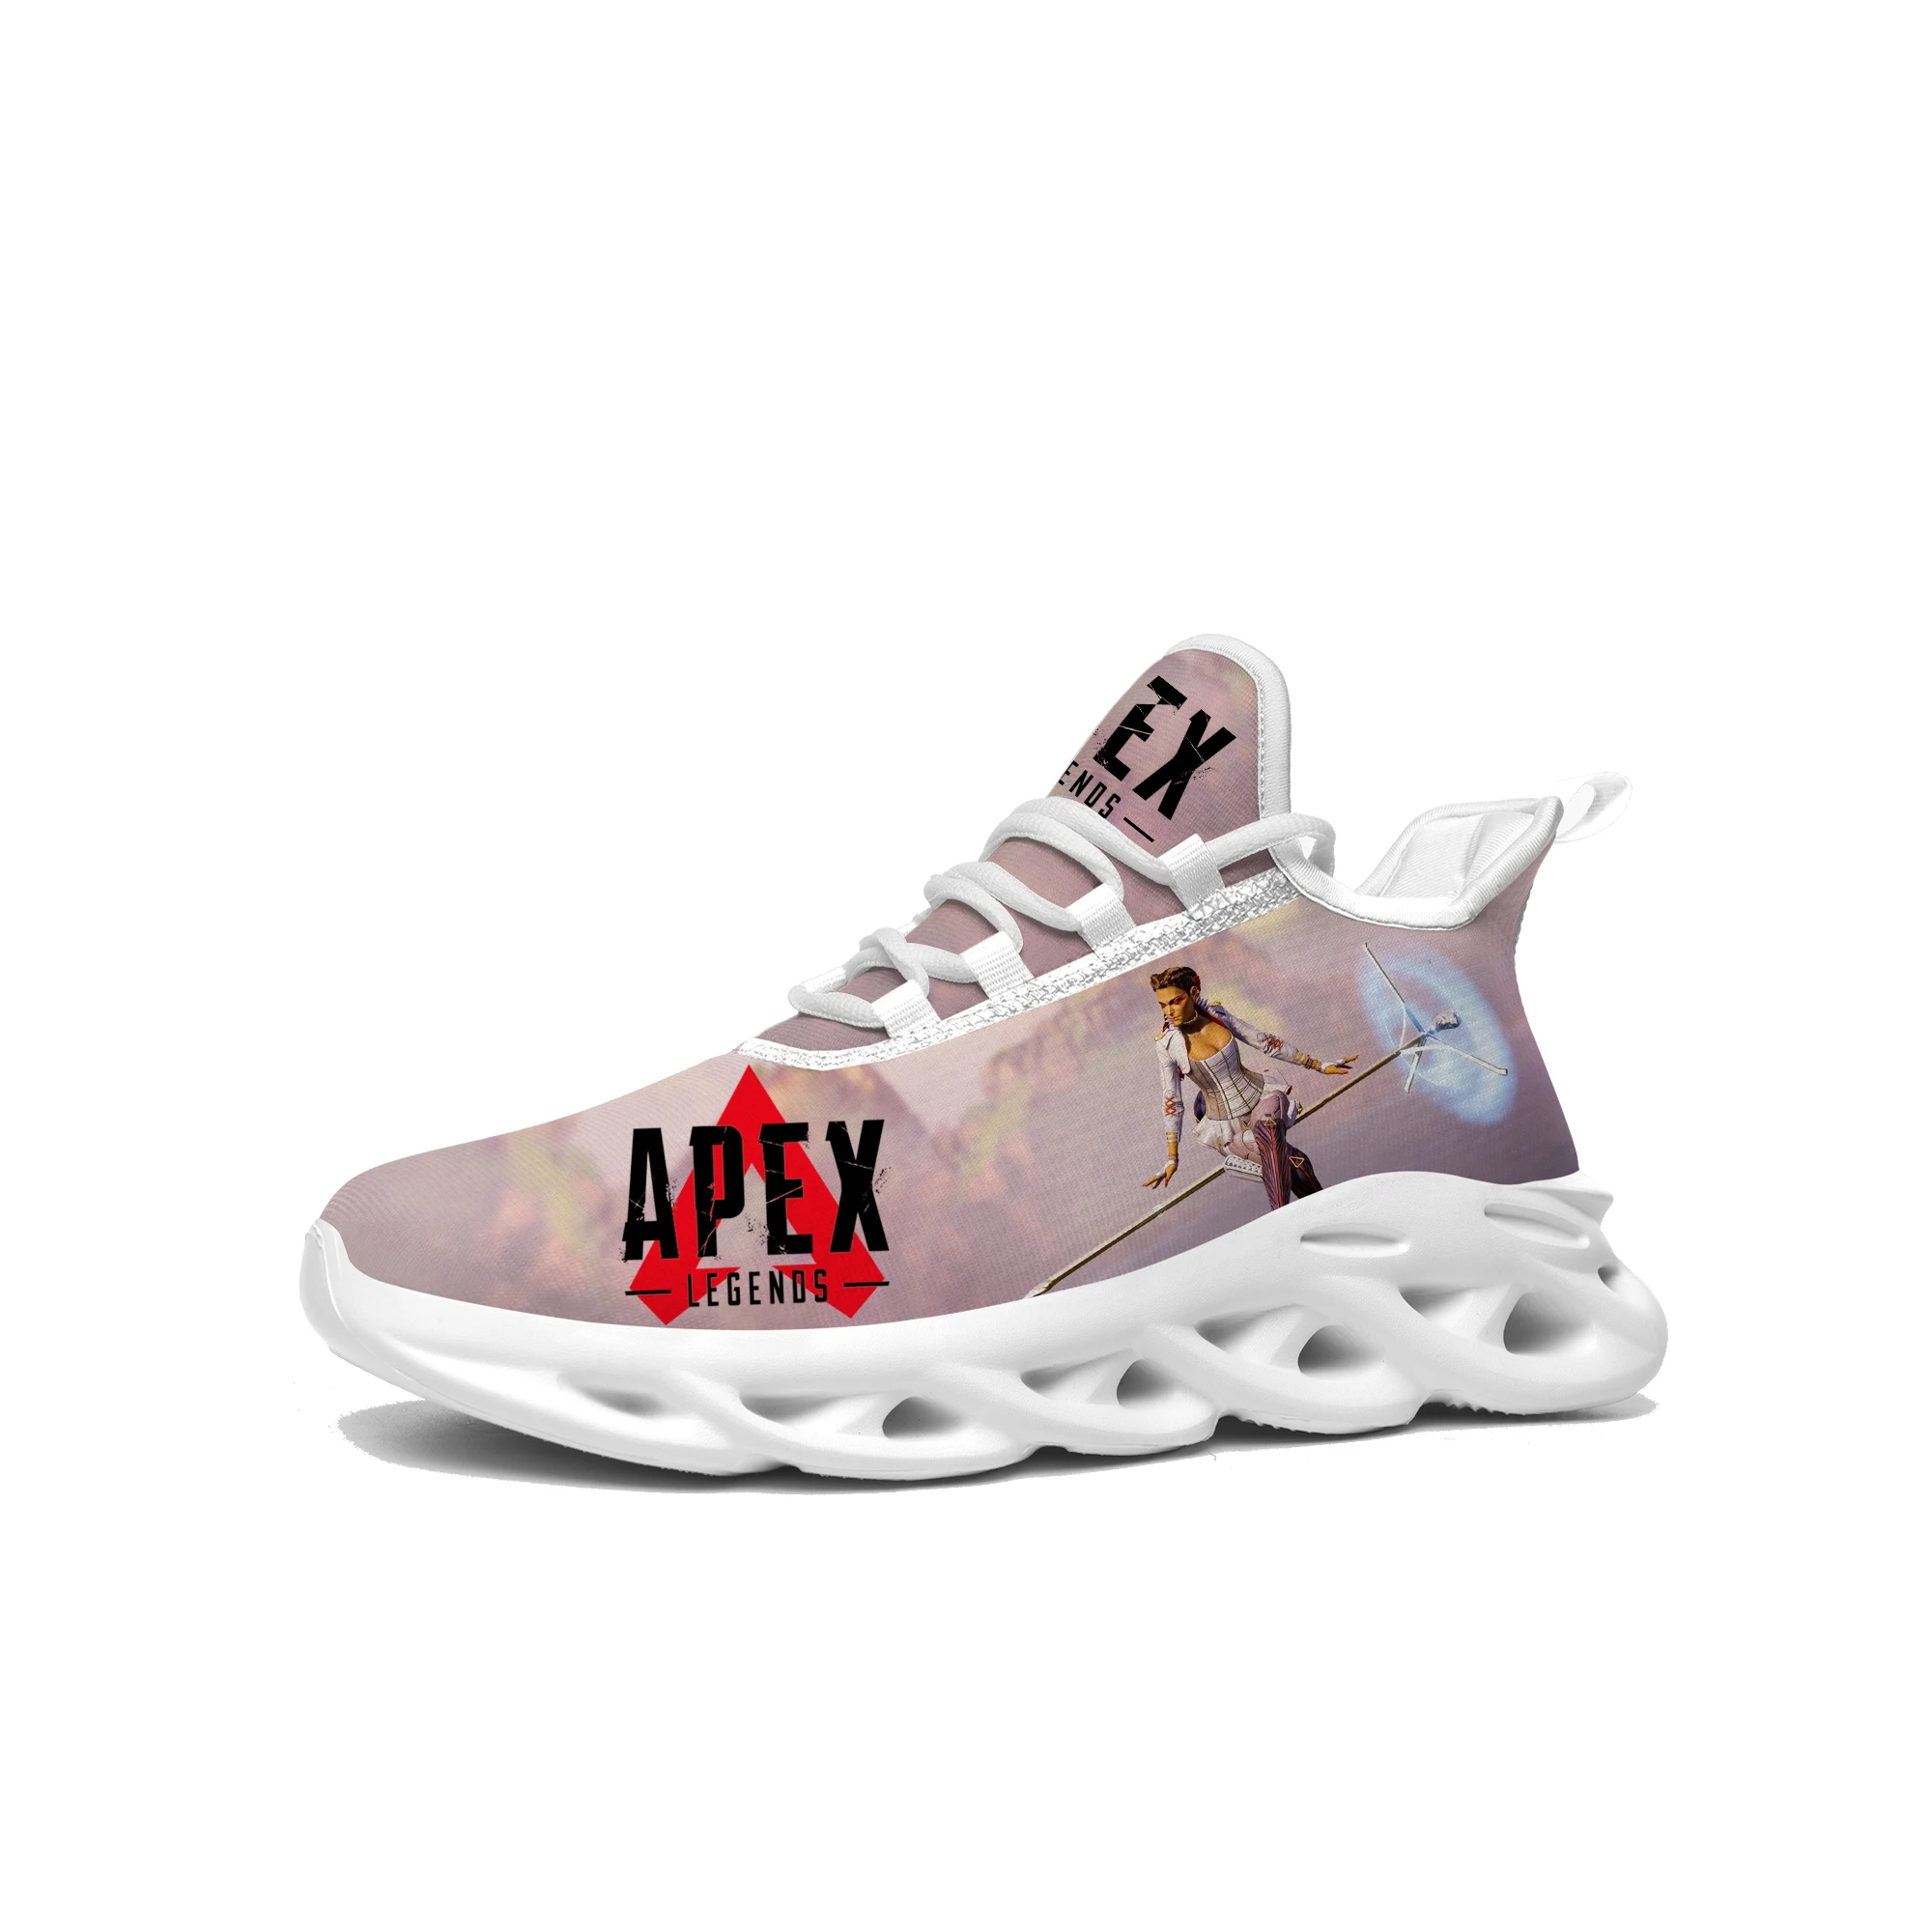 

Apex Legends Loba Sneakers Hot Cartoon Game Mens Womens Teenager Sports Running Shoes High Quality Custom Built Lace Up Shoes